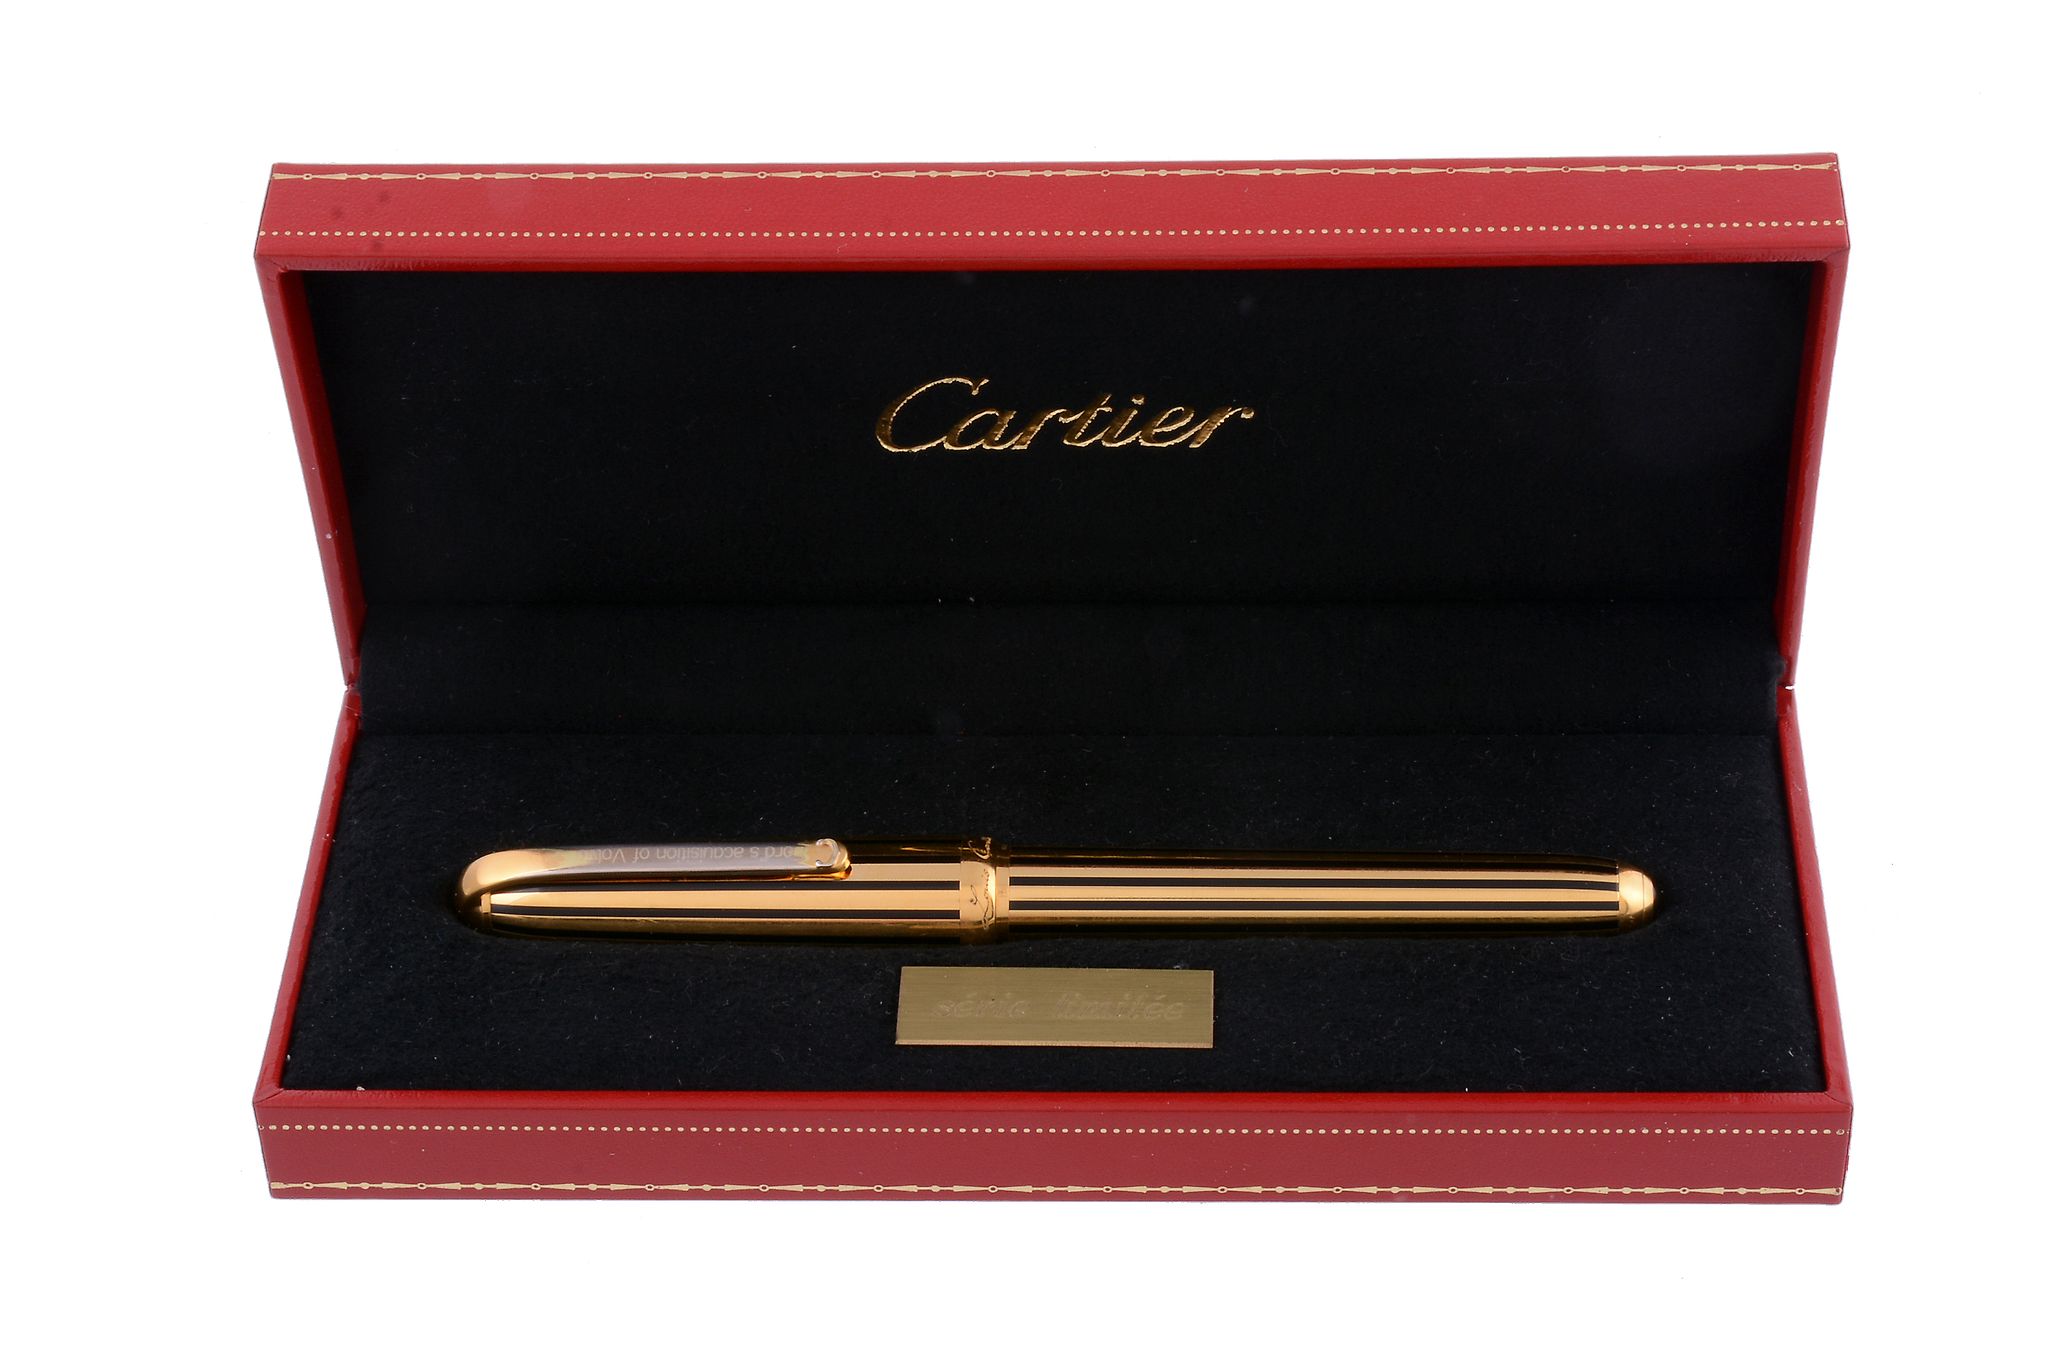 Cartier, Dandy, a limited edition fountain pen,   no. 0773/1847, the gold plated and black lacquer